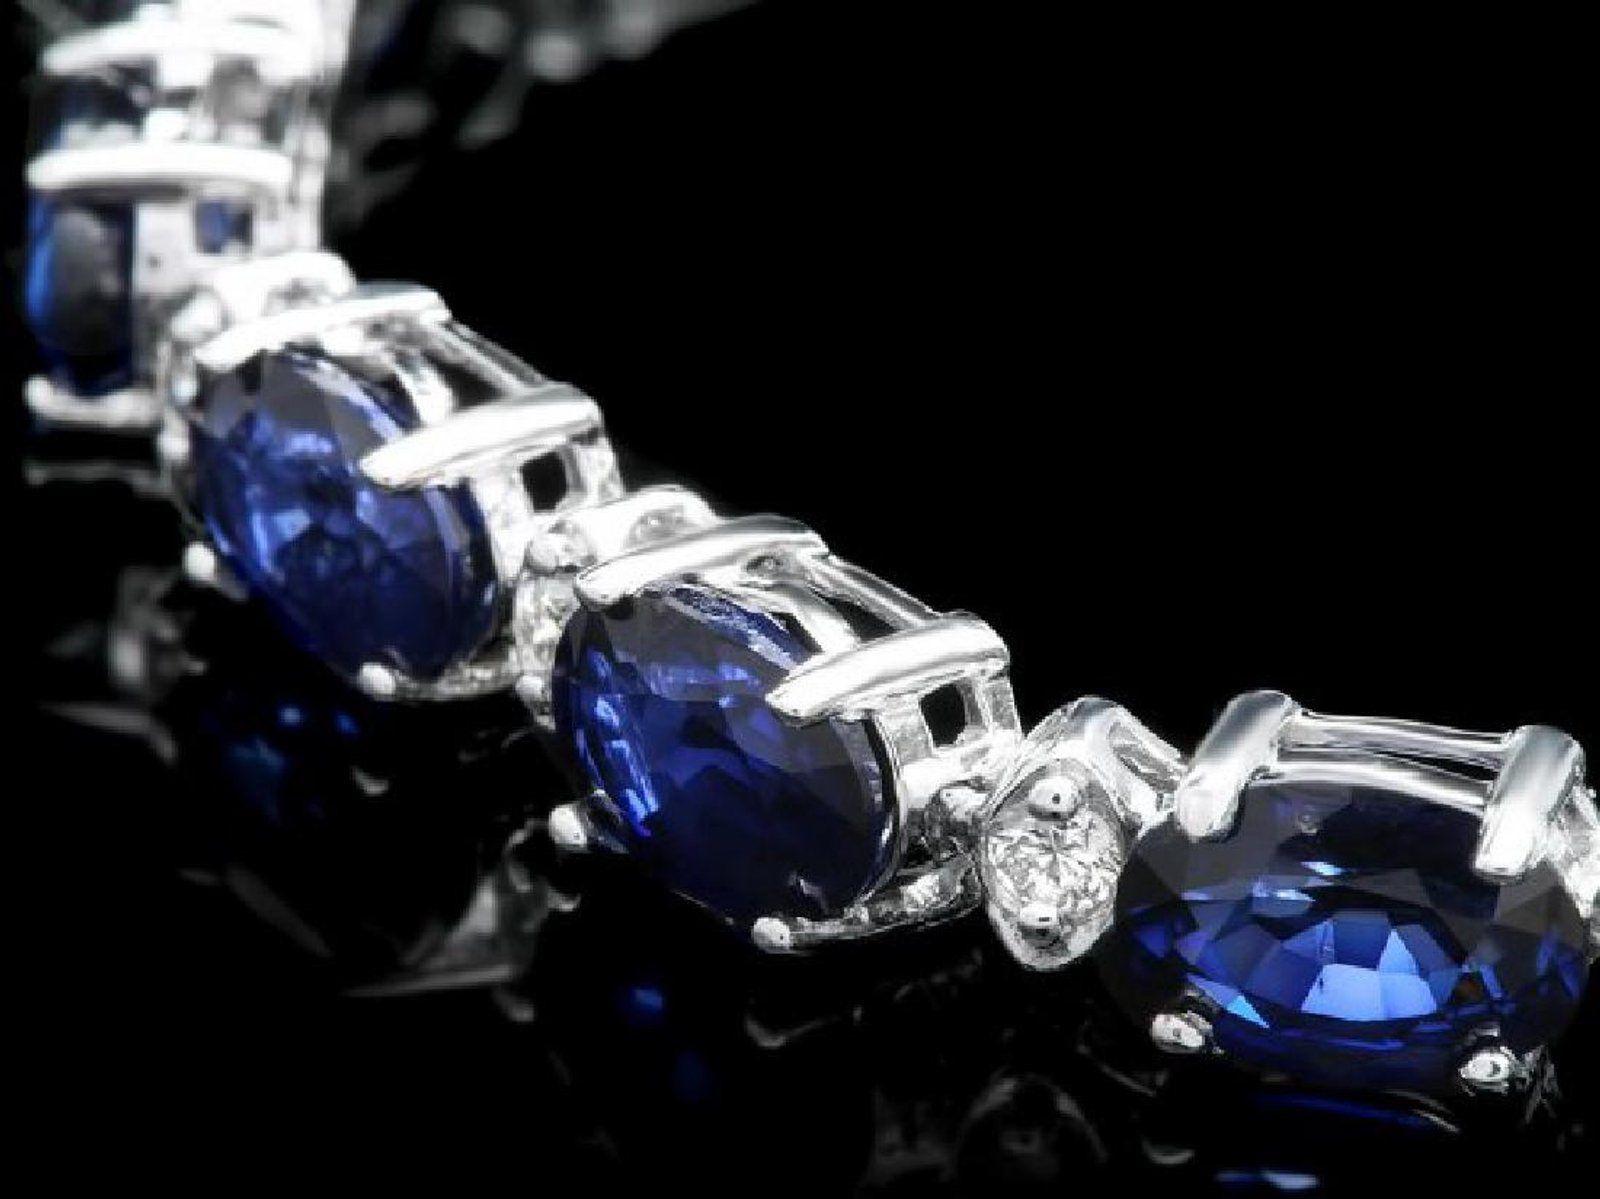 Very Impressive 13.50 Carats Natural Sapphire & Diamond 14K Solid White Gold Bracelet

STAMPED: 14K

Total Natural Round Diamonds Weight: Approx. 0.50 Carats (color G-H / Clarity SI1-Si2)

Total Natural Sapphire Weight is: Approx. 13.00